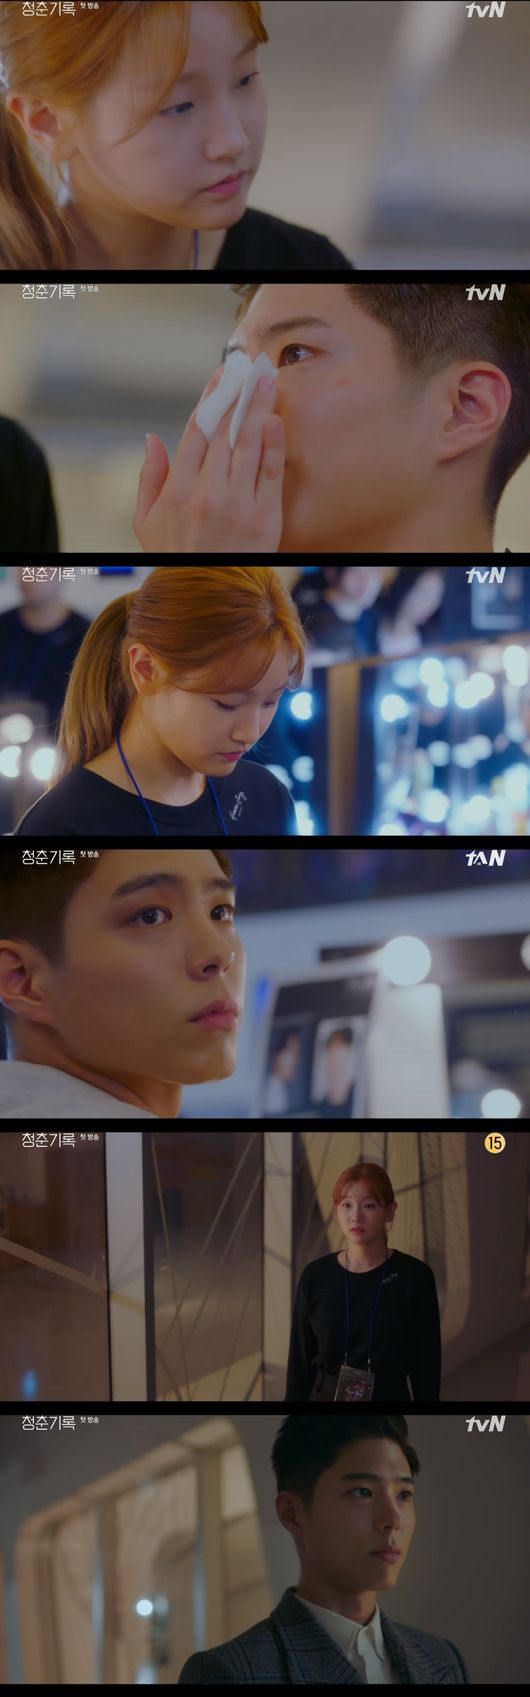 Park Bo-gum was shocked by the fact that he was a worstball for his family.On TVN Record of Youth broadcast on the 7th, Park Bo-gum met his steam fan, Park So-dam, while he was shocked by the evaluation of his family surrounding him.Sa Hye-joon had a dream of turning from model to actor, ITZY was not easy, and eventually he could not get the right role and he went to Alba.While playing the alba, Sa Hye-joon was offered the position of manager of the store, but he refused. Sa Hye-joon met Kim Jin-woo (Kwon Soo-hyun) and Won Hae-hyo (Byeon Woo-seok).Then Won Hae-hyos brother, Won Hae-na (Jo Yu-jung), pulled the car and took Kim Jin-woo (Kwon Soo-hyun).Sa Hye-joon was born as a gold spoon and was recognized more than himself. He said, I am constantly being attacked. To reality.If we dont do this, were going to go to the army. Then, he told Won Hae-hyo, If we change, we lose innocence.After a tired day, she went home. Her mother, Han Ae-sook (Ha Hee-ra), gave her a letter of admission from the Military Manpower Administration.If it works, I think it is an opportunity given by heaven and I will postpone it once. So, my brother, Sa Kyung-joon (Lee Jae-won), said, I have to go anyway, but just go quickly. My mother knows that she is a woof in my house, and ITZY is not it.Is it a family evaluation? My brother is also a personality when I look at my standards, said Sa Hye-joon, who was shocked by the words But his father, Lingnan (Park Soo-young), was angry when he found out that Sa Hye-joon had received a notice of his admission.When you look at your grandfather, you were just young, said Lingnan, looking at his grandfather and Sa Hye-joon.My father said, If I do not get the money I collected and I do not buy it, I will not live like this. But my grandfather told Sa Hye-joon, So I do not live without talking.My house is not Hyejun, but I am. On the other hand, Sa Hye-joon stood at the Homme stage fashion show.After choosing the way of a makeup artist while attending a large company, he was a long-time fan of Sa Hye-joon, who is working as an assistant, and was excited to meet him, but while working, he tried not to show his feelings.However, because of the stable Sa Hye-joon and Won Hae-hyo, the senior designer was confused and hid alone and burst into tears. However, when I saw the picture of Sa Hye-joon, he said, I am happy because I am your fan.At that time, Sa Hye-joon asked, Was it my fan? The two had an extraordinary first meeting: TVN Record of Youth broadcast capture.